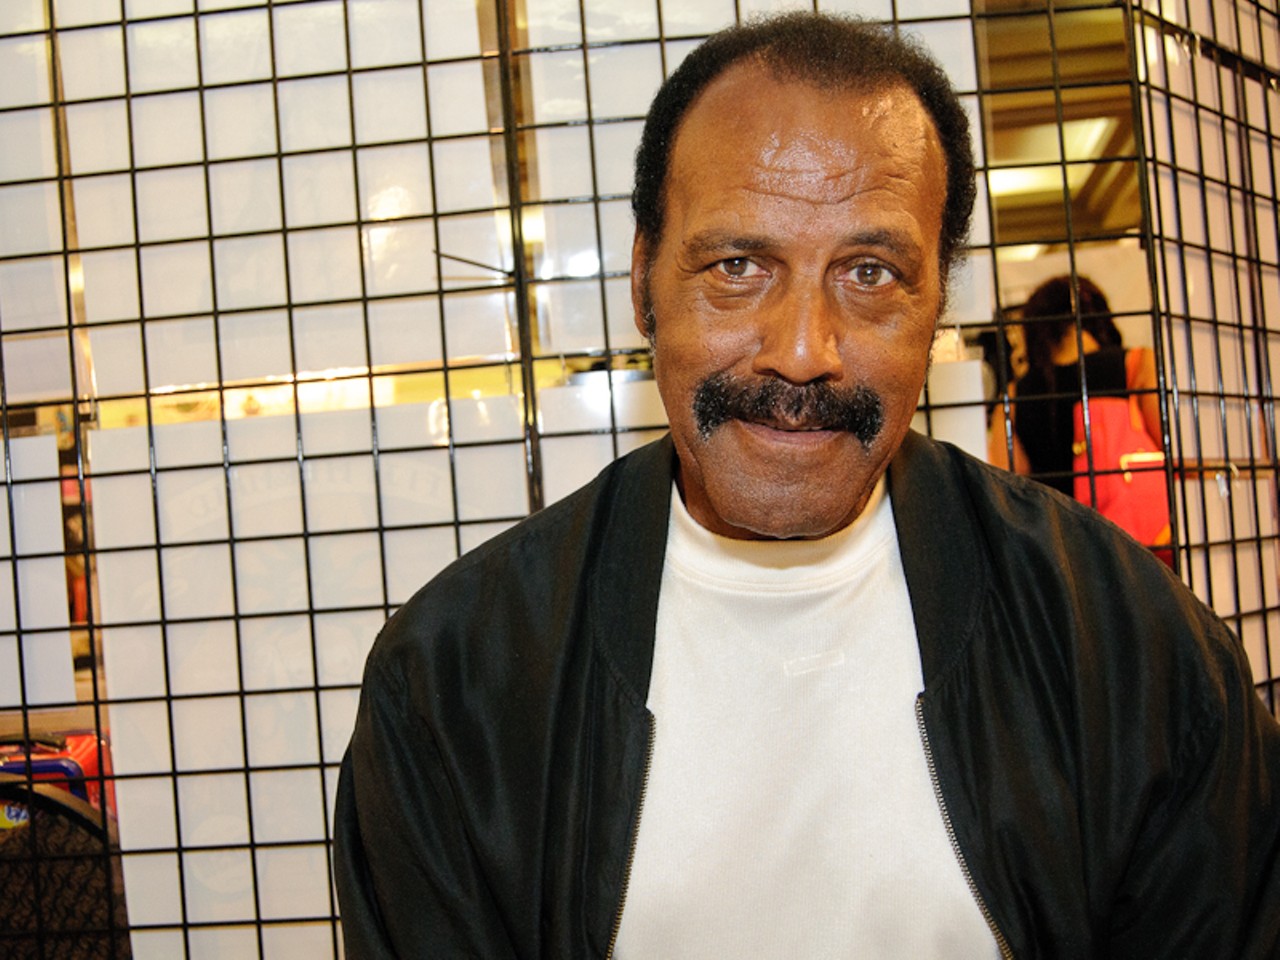 Fred "The Hammer" Williamson, while also known as a professional football player, was more well-known at Con-Tamination for his roles in films like 1973's Black Caesar.